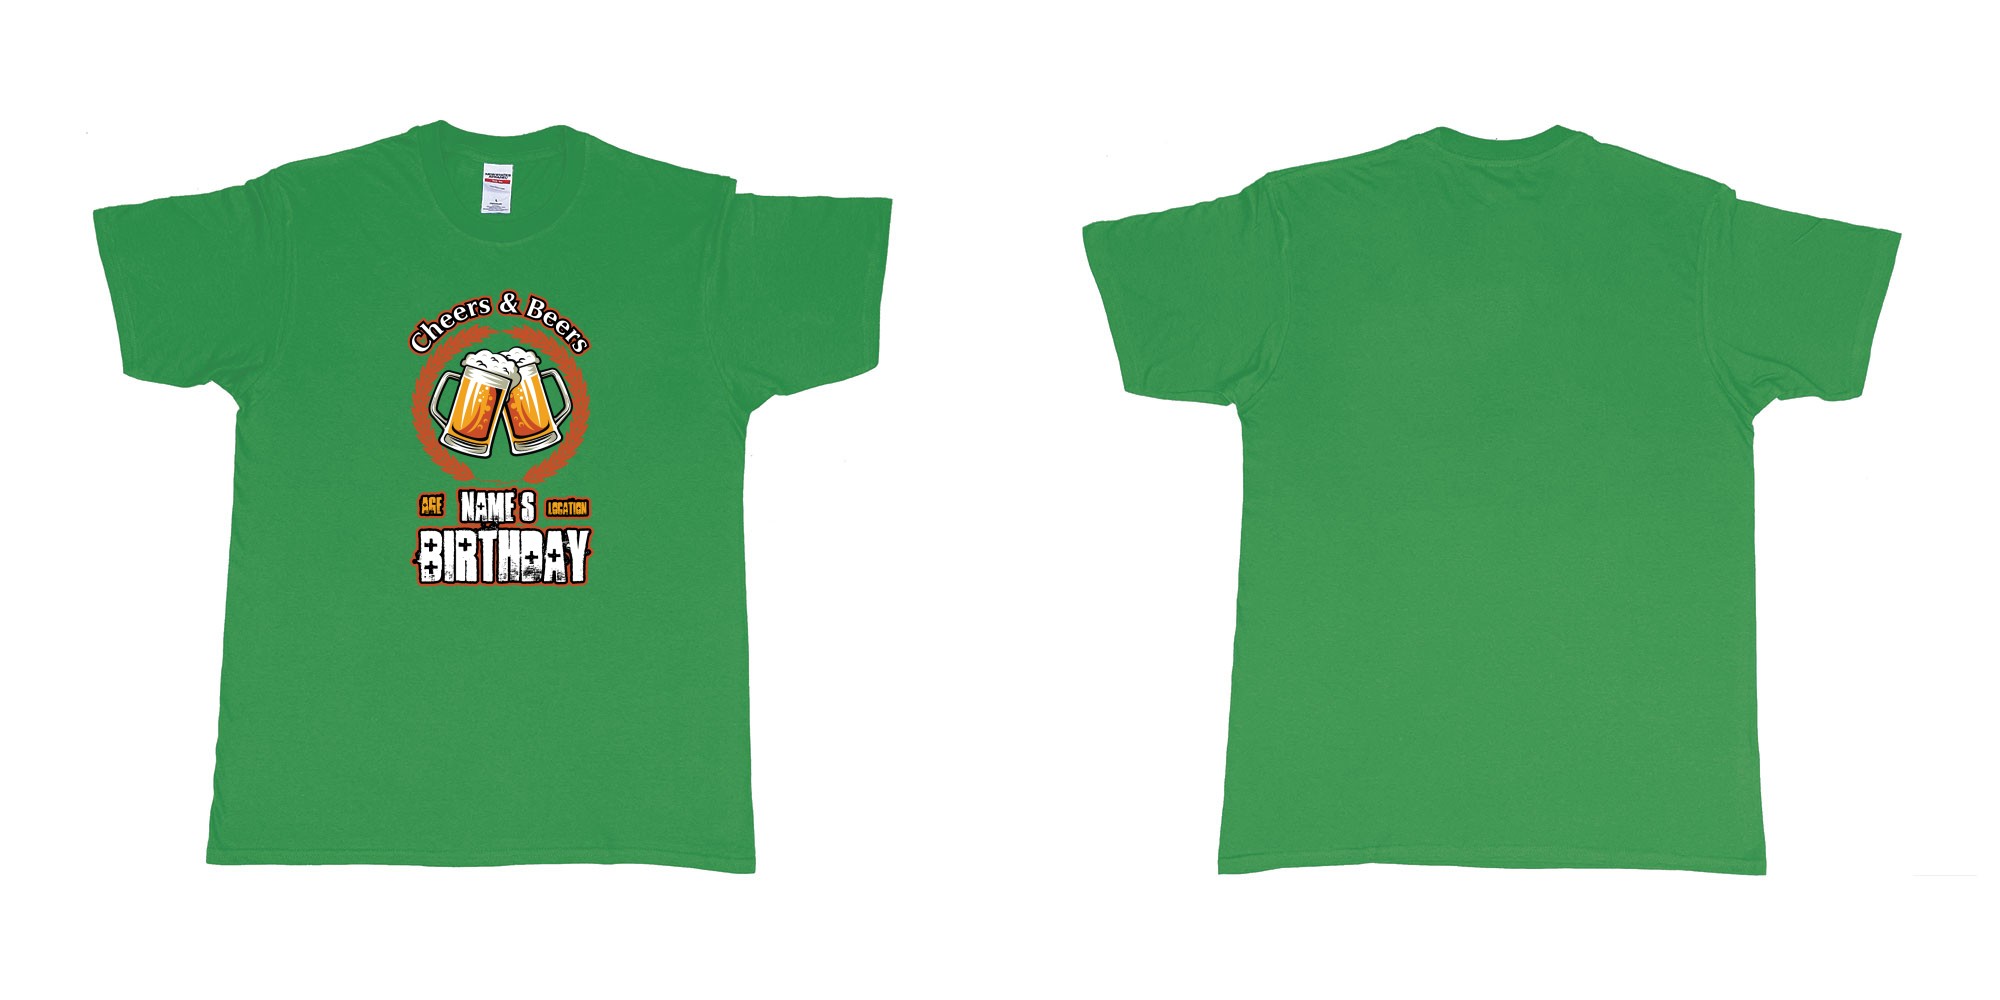 Custom tshirt design cheers and beers birthday in fabric color irish-green choice your own text made in Bali by The Pirate Way